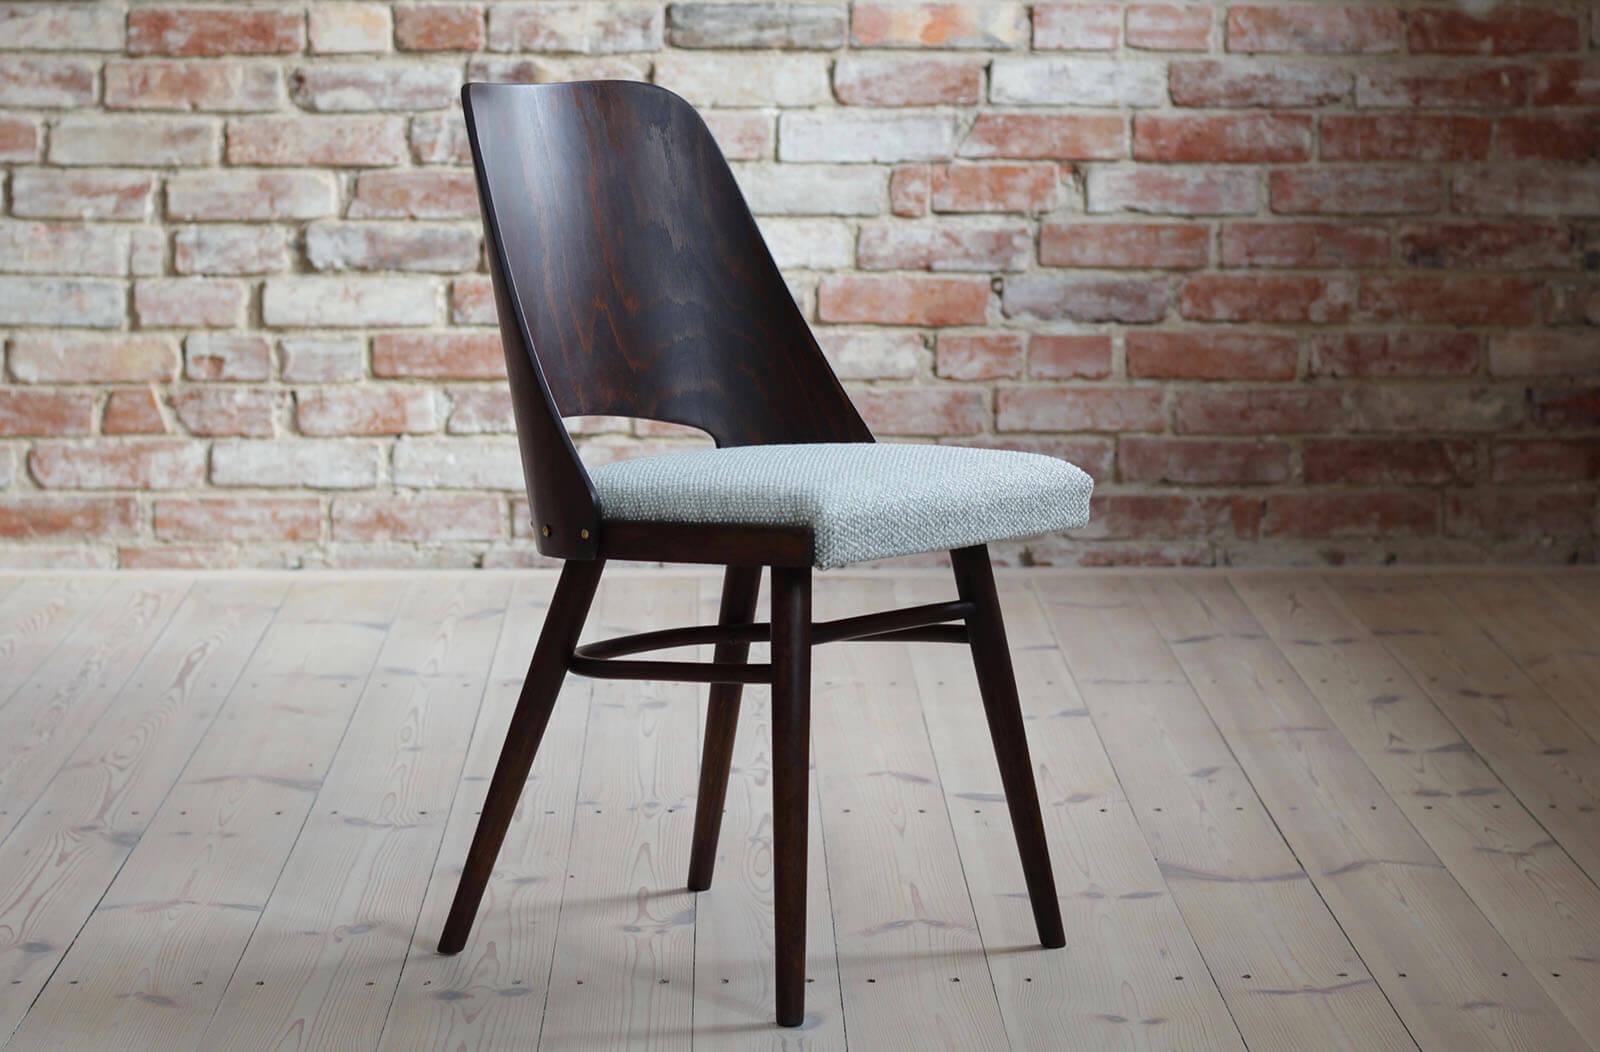 Set of 4 Dining Chairs by R. Hofman for Ton, Model 514, New Sahco Upholstery In Good Condition For Sale In Wrocław, Poland